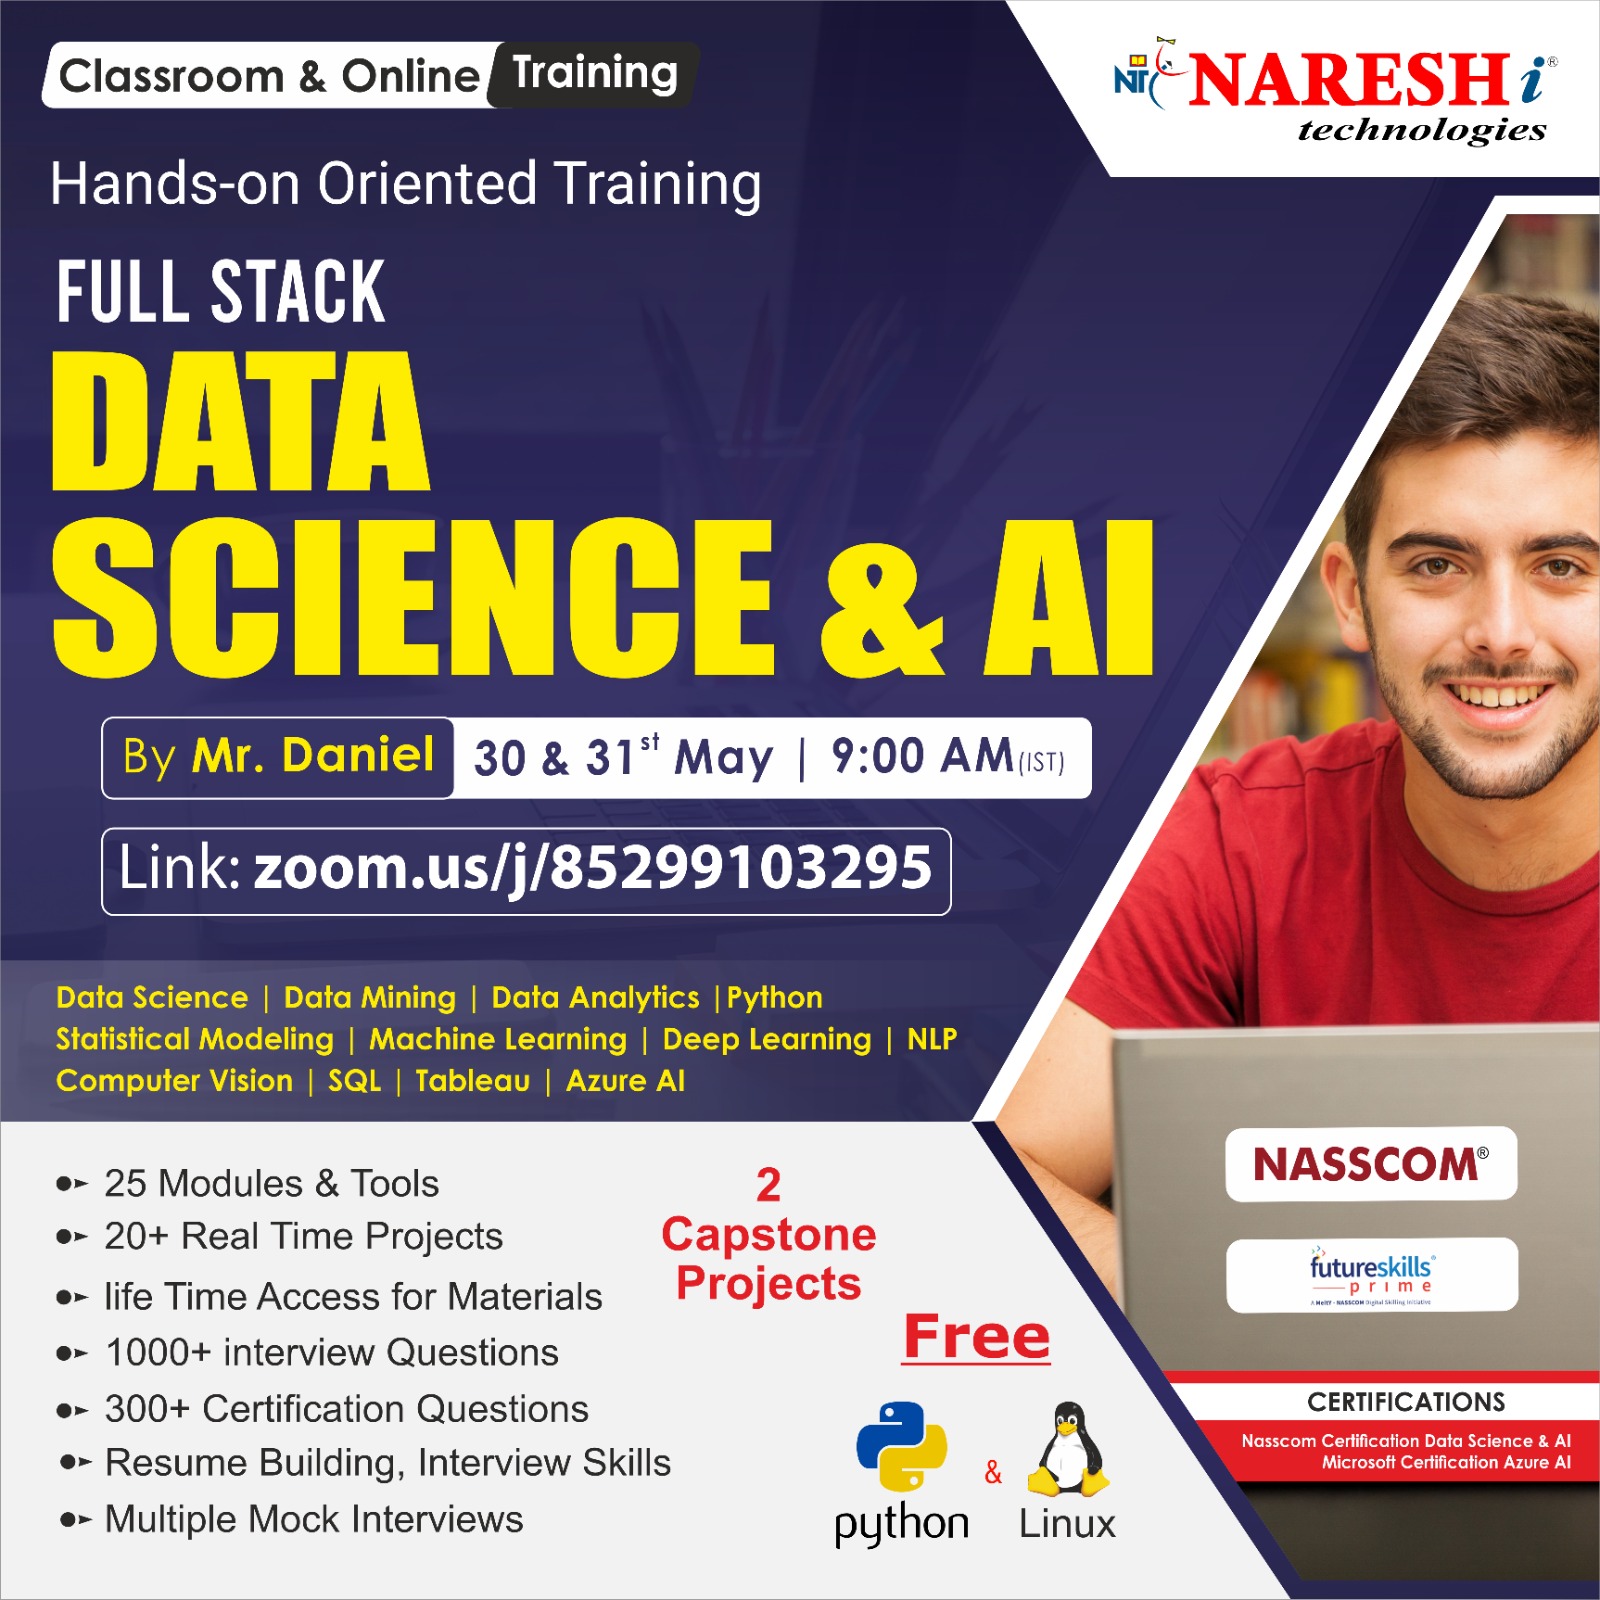 Free Demo On Full Stack Data Science & AI - Naresh IT, Online Event